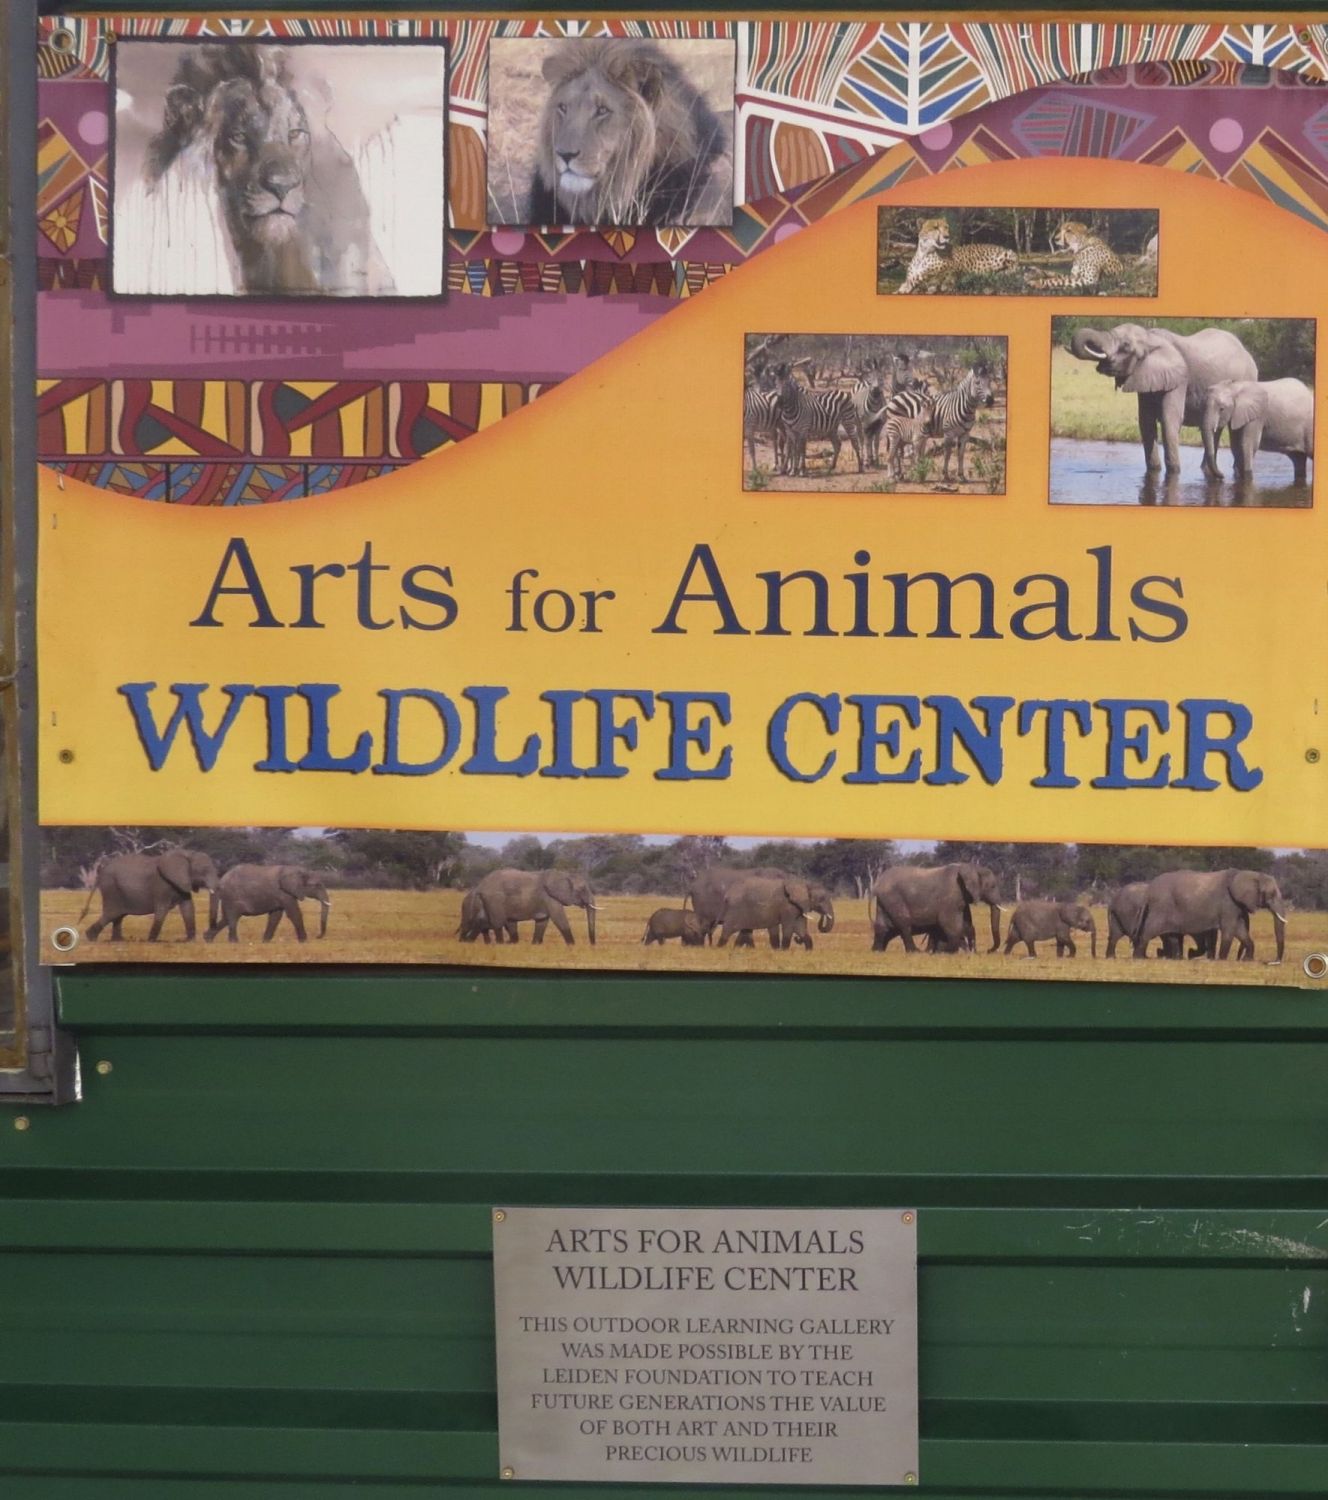 Our wildlife Center works with hundreds of children every year